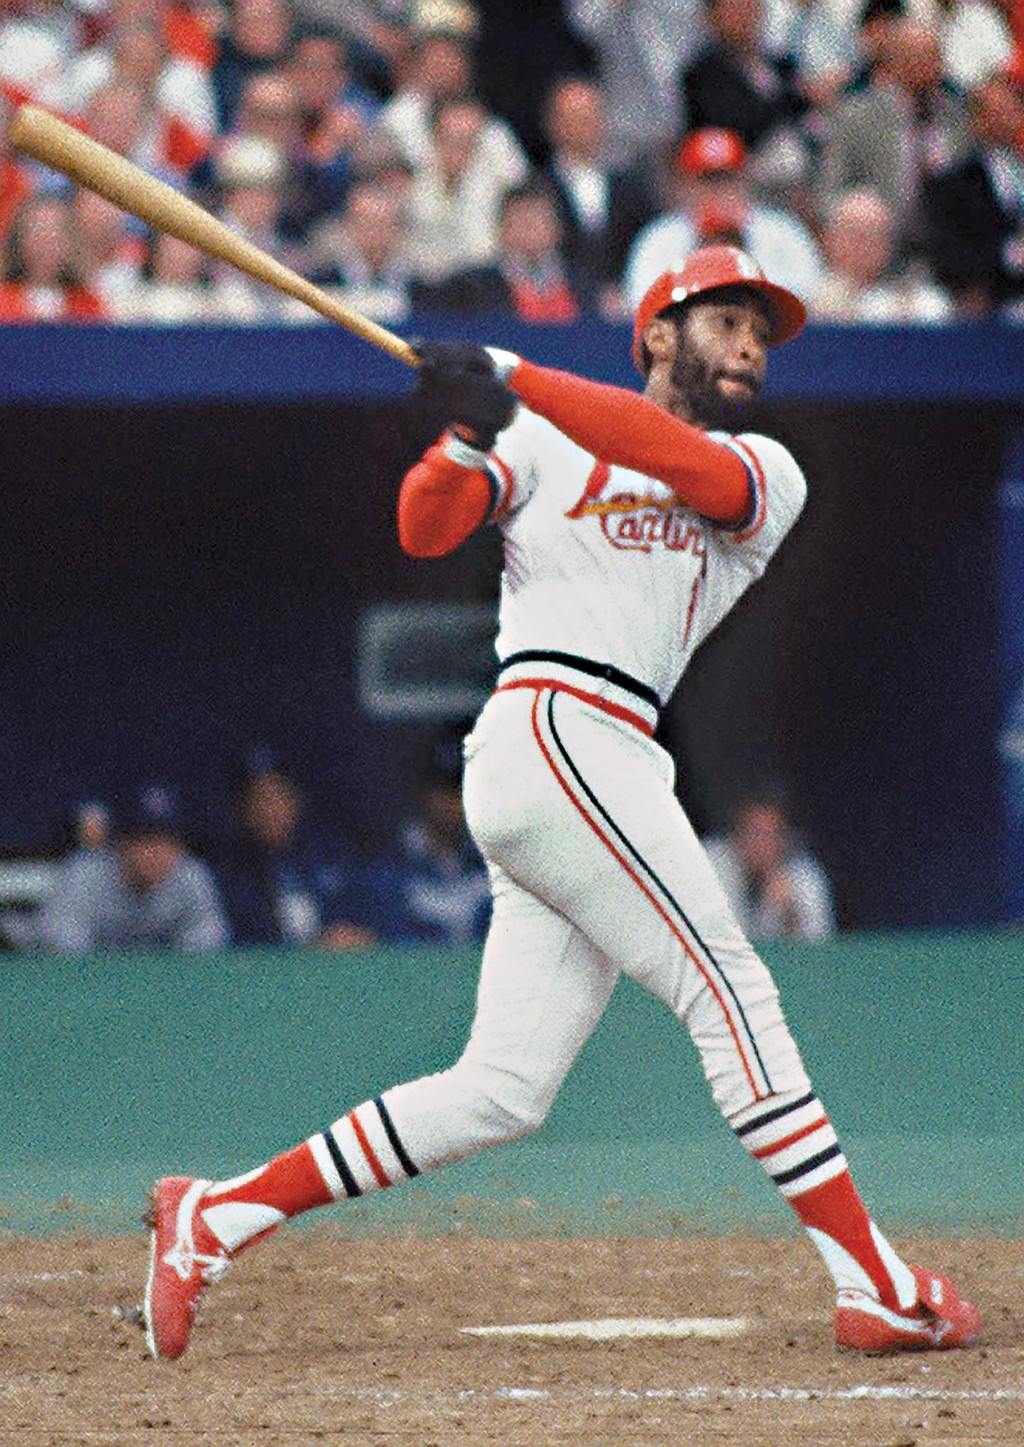 Download Ozzie Smith Playing Baseball Wallpaper